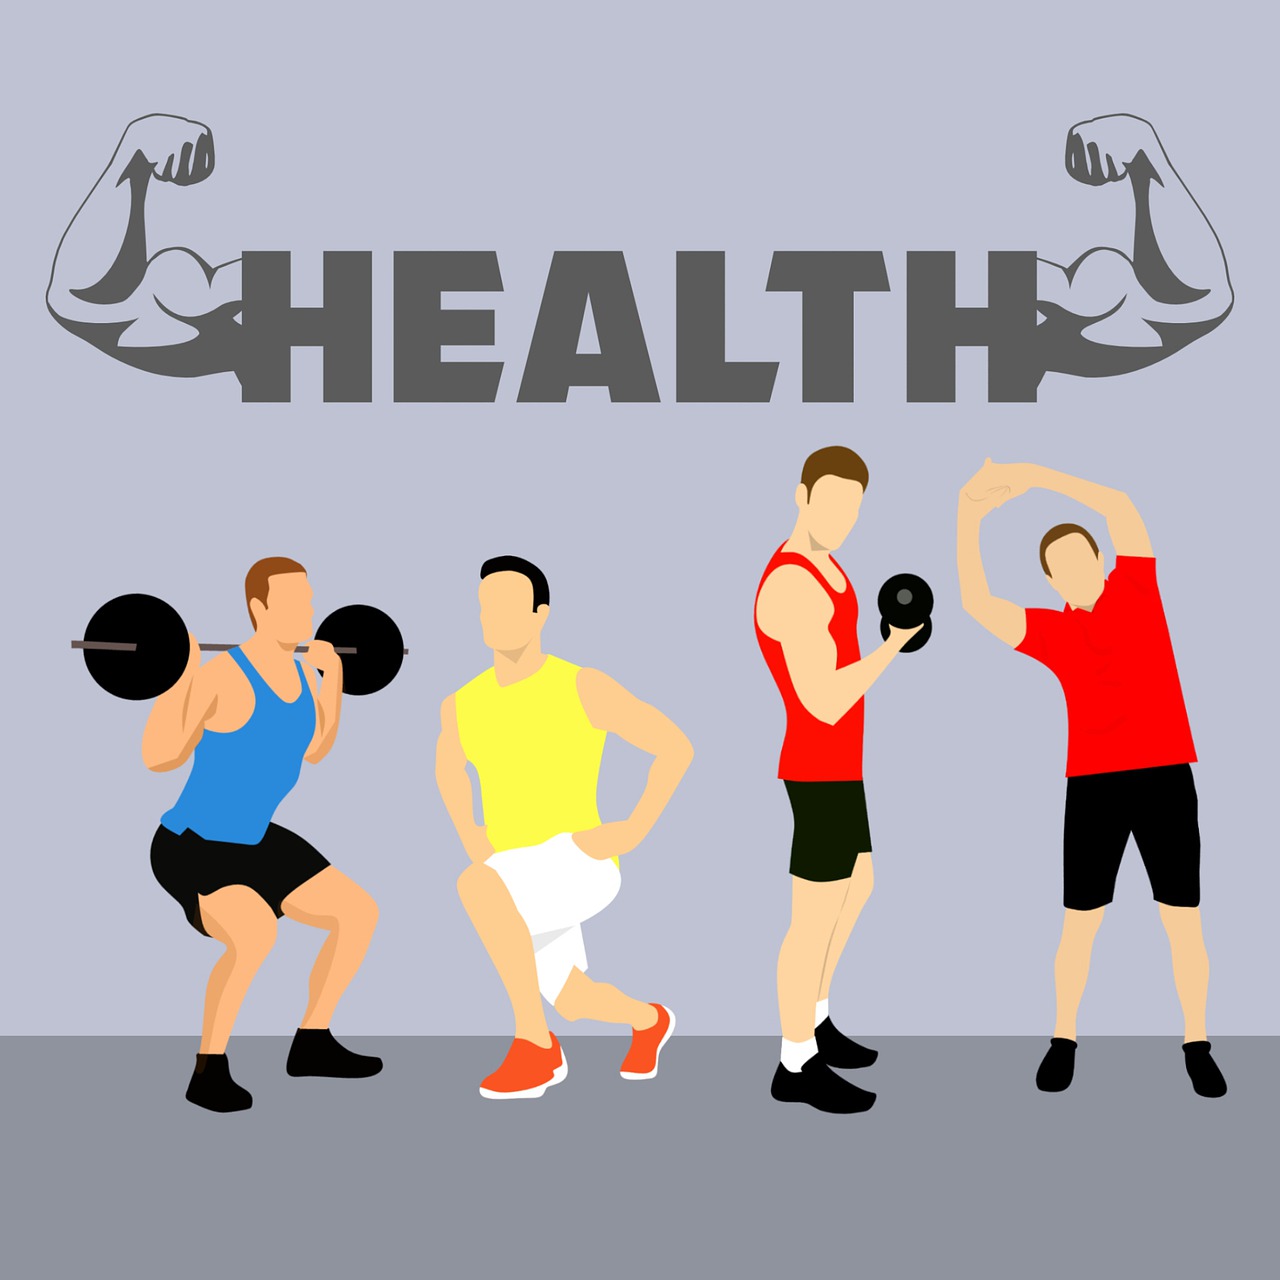 a group of men standing next to each other holding dumb dumb dumb dumb dumb dumb dumb dumb dumb dumb dumb dumb dumb dumb dumb dumb dumb dumb, an illustration of, ifbb fitness body, worksafe. illustration, a beautiful artwork illustration, medical background